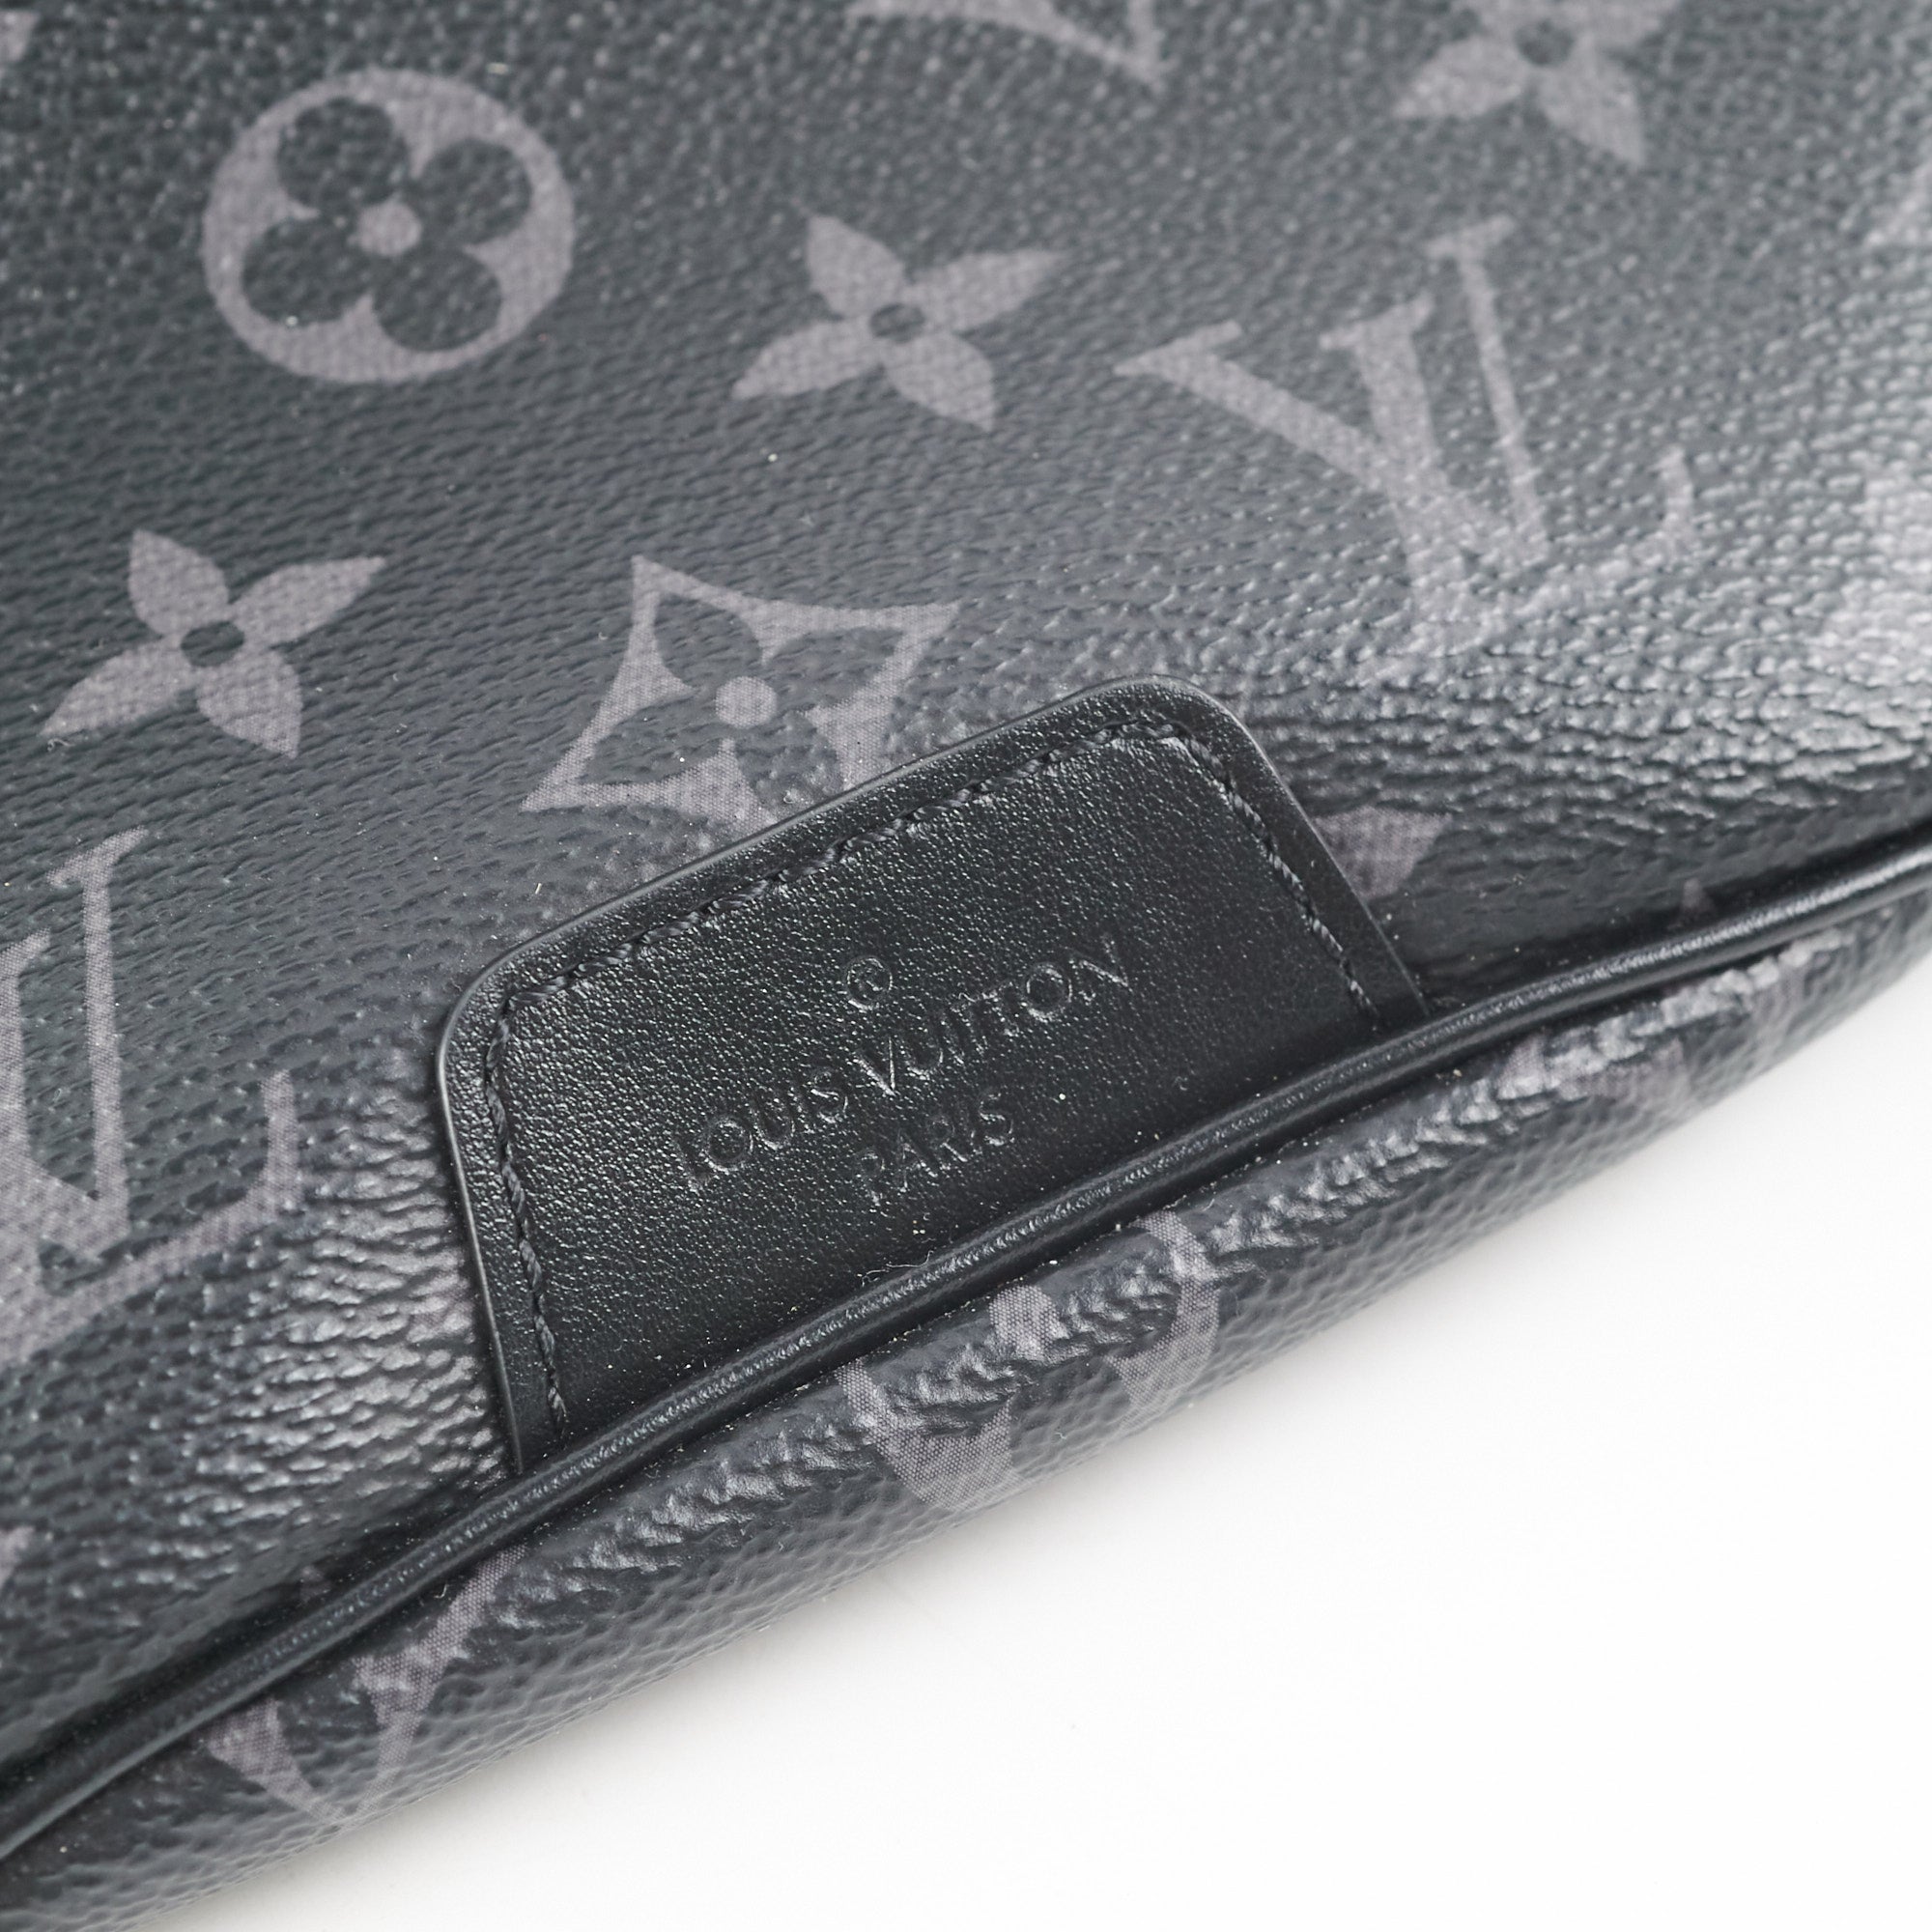 Louis Vuitton Discovery Discovery bumbag pm (M46036, M46108)